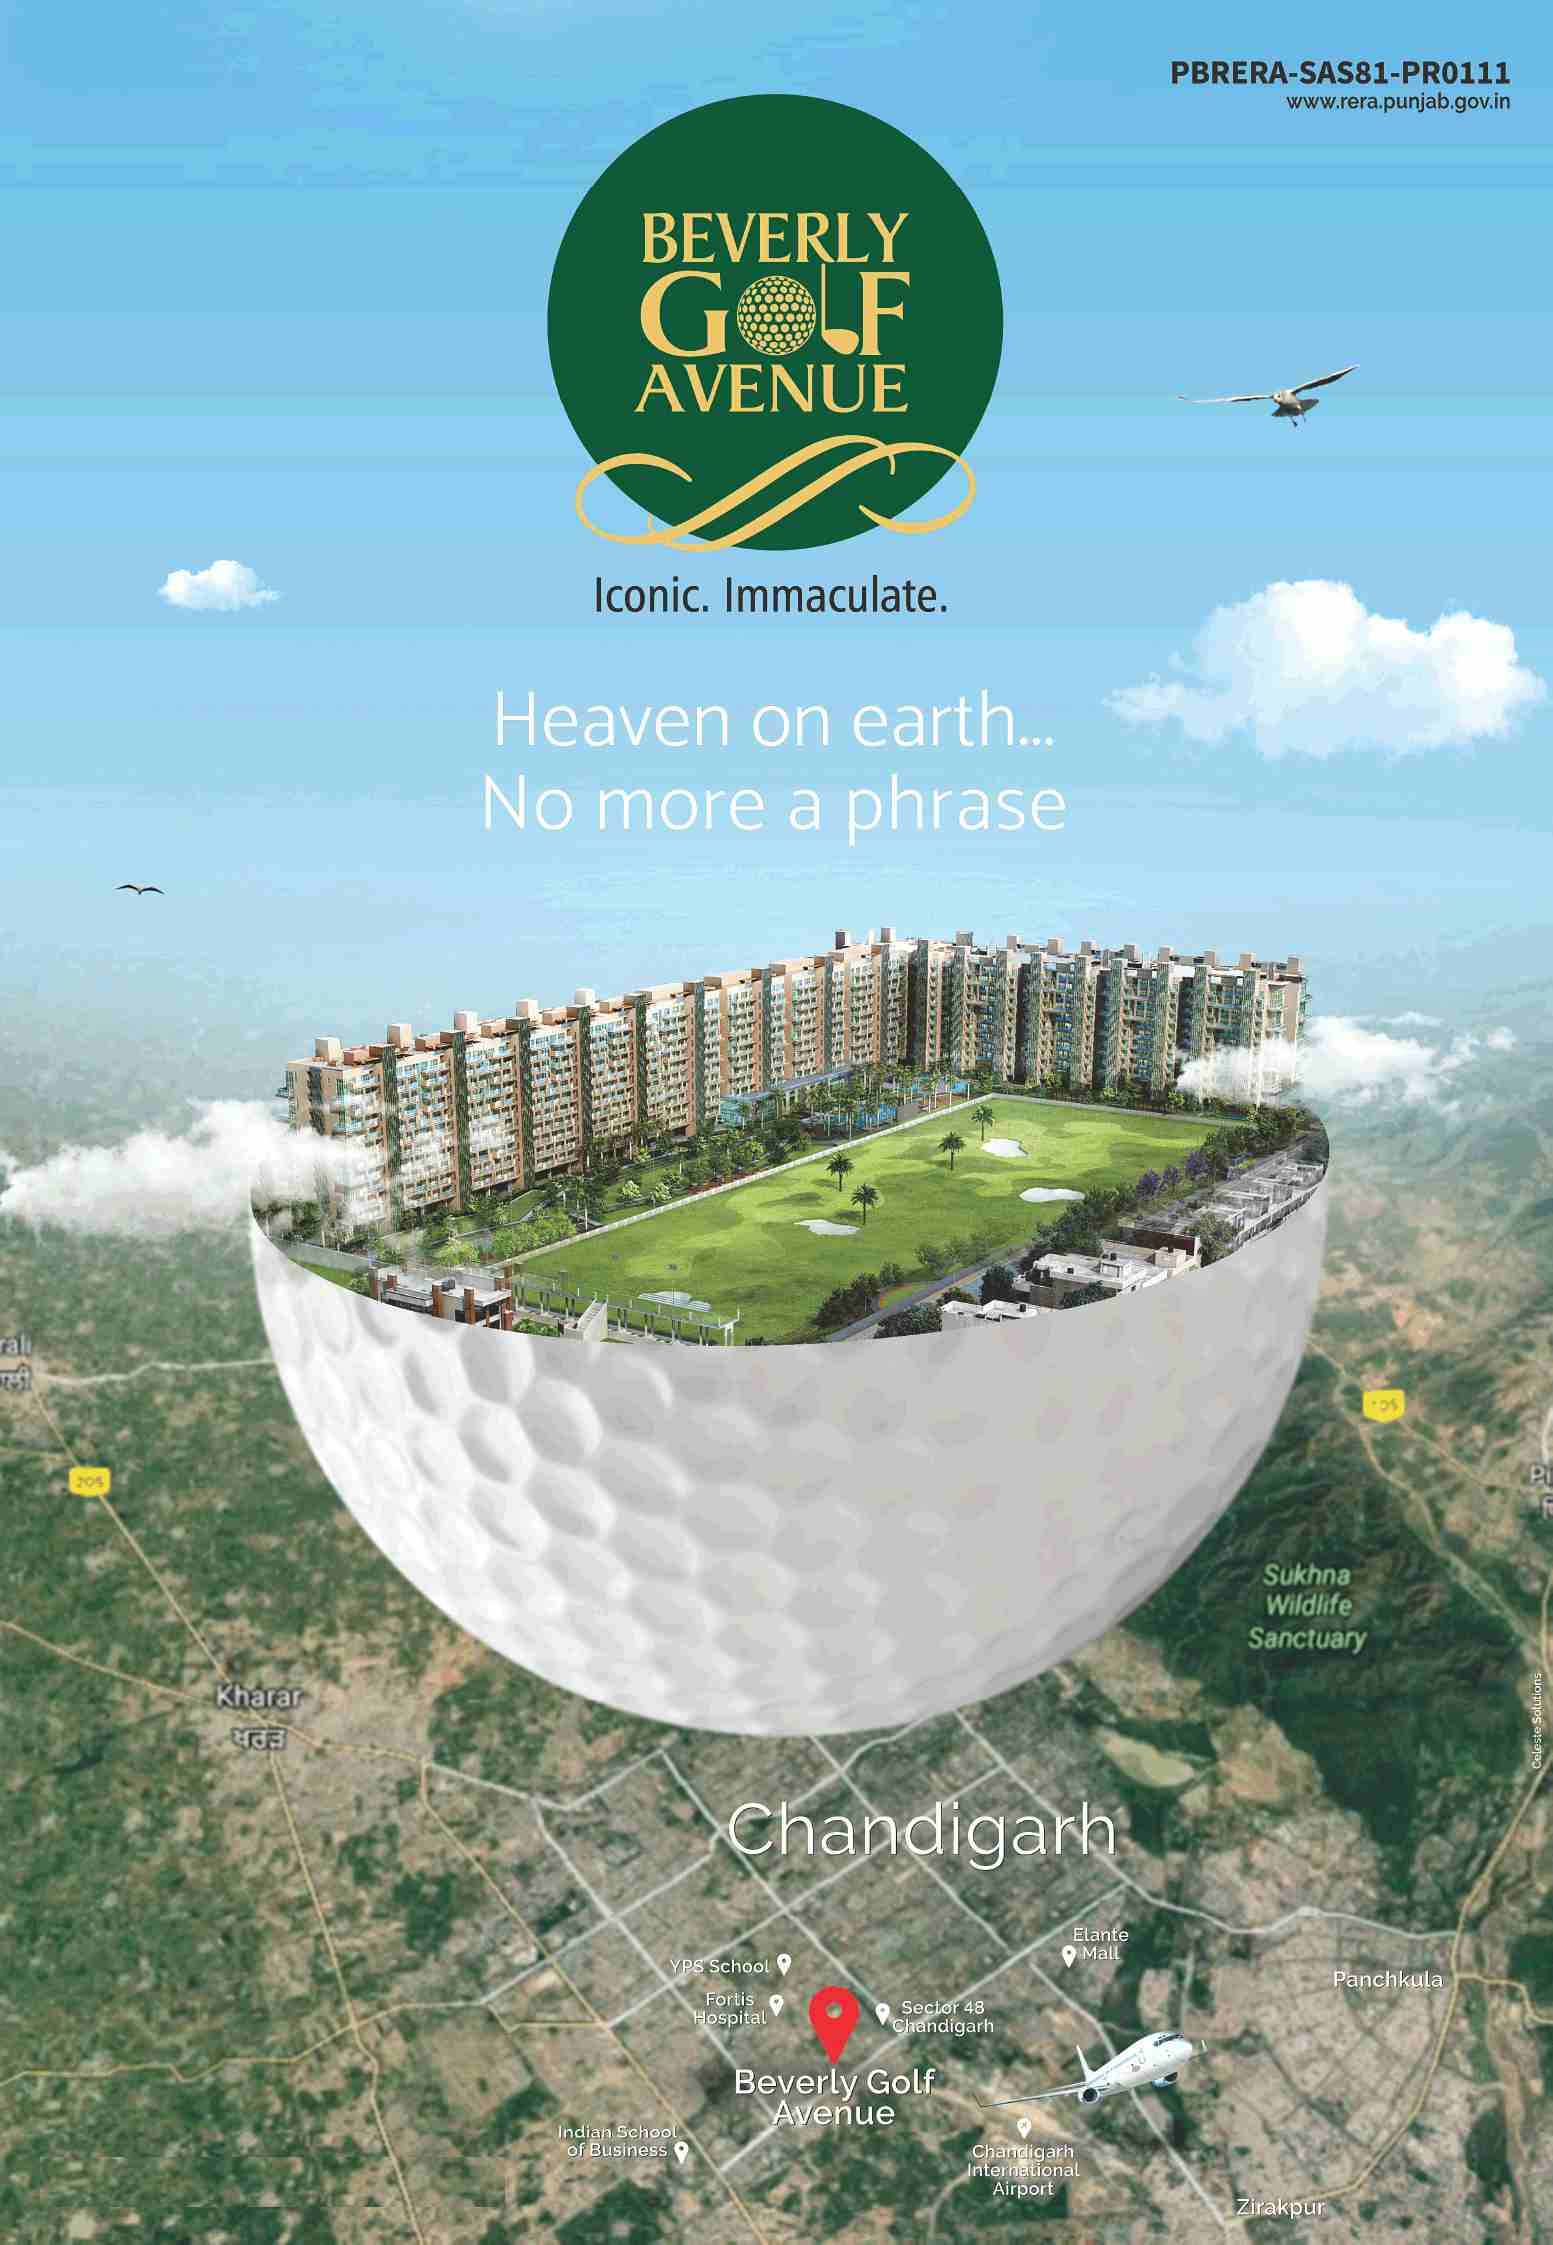 Book 3 & 4 BHK luxury residences at MB Beverly Golf Avenue in Sector 65, Mohali Update